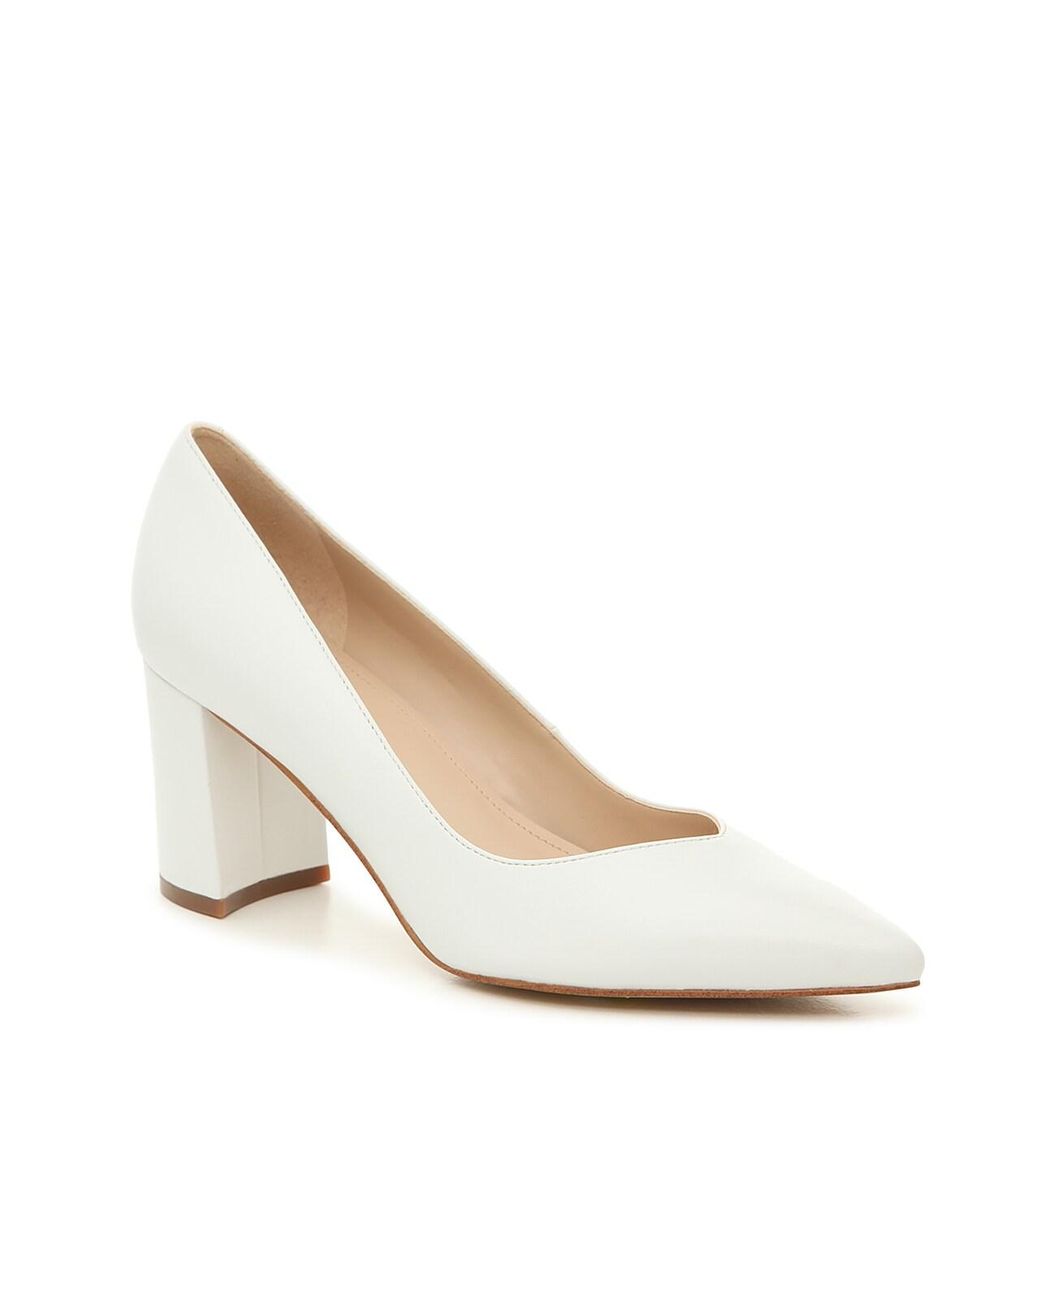 Marc Fisher Caitlin Pump in White | Lyst